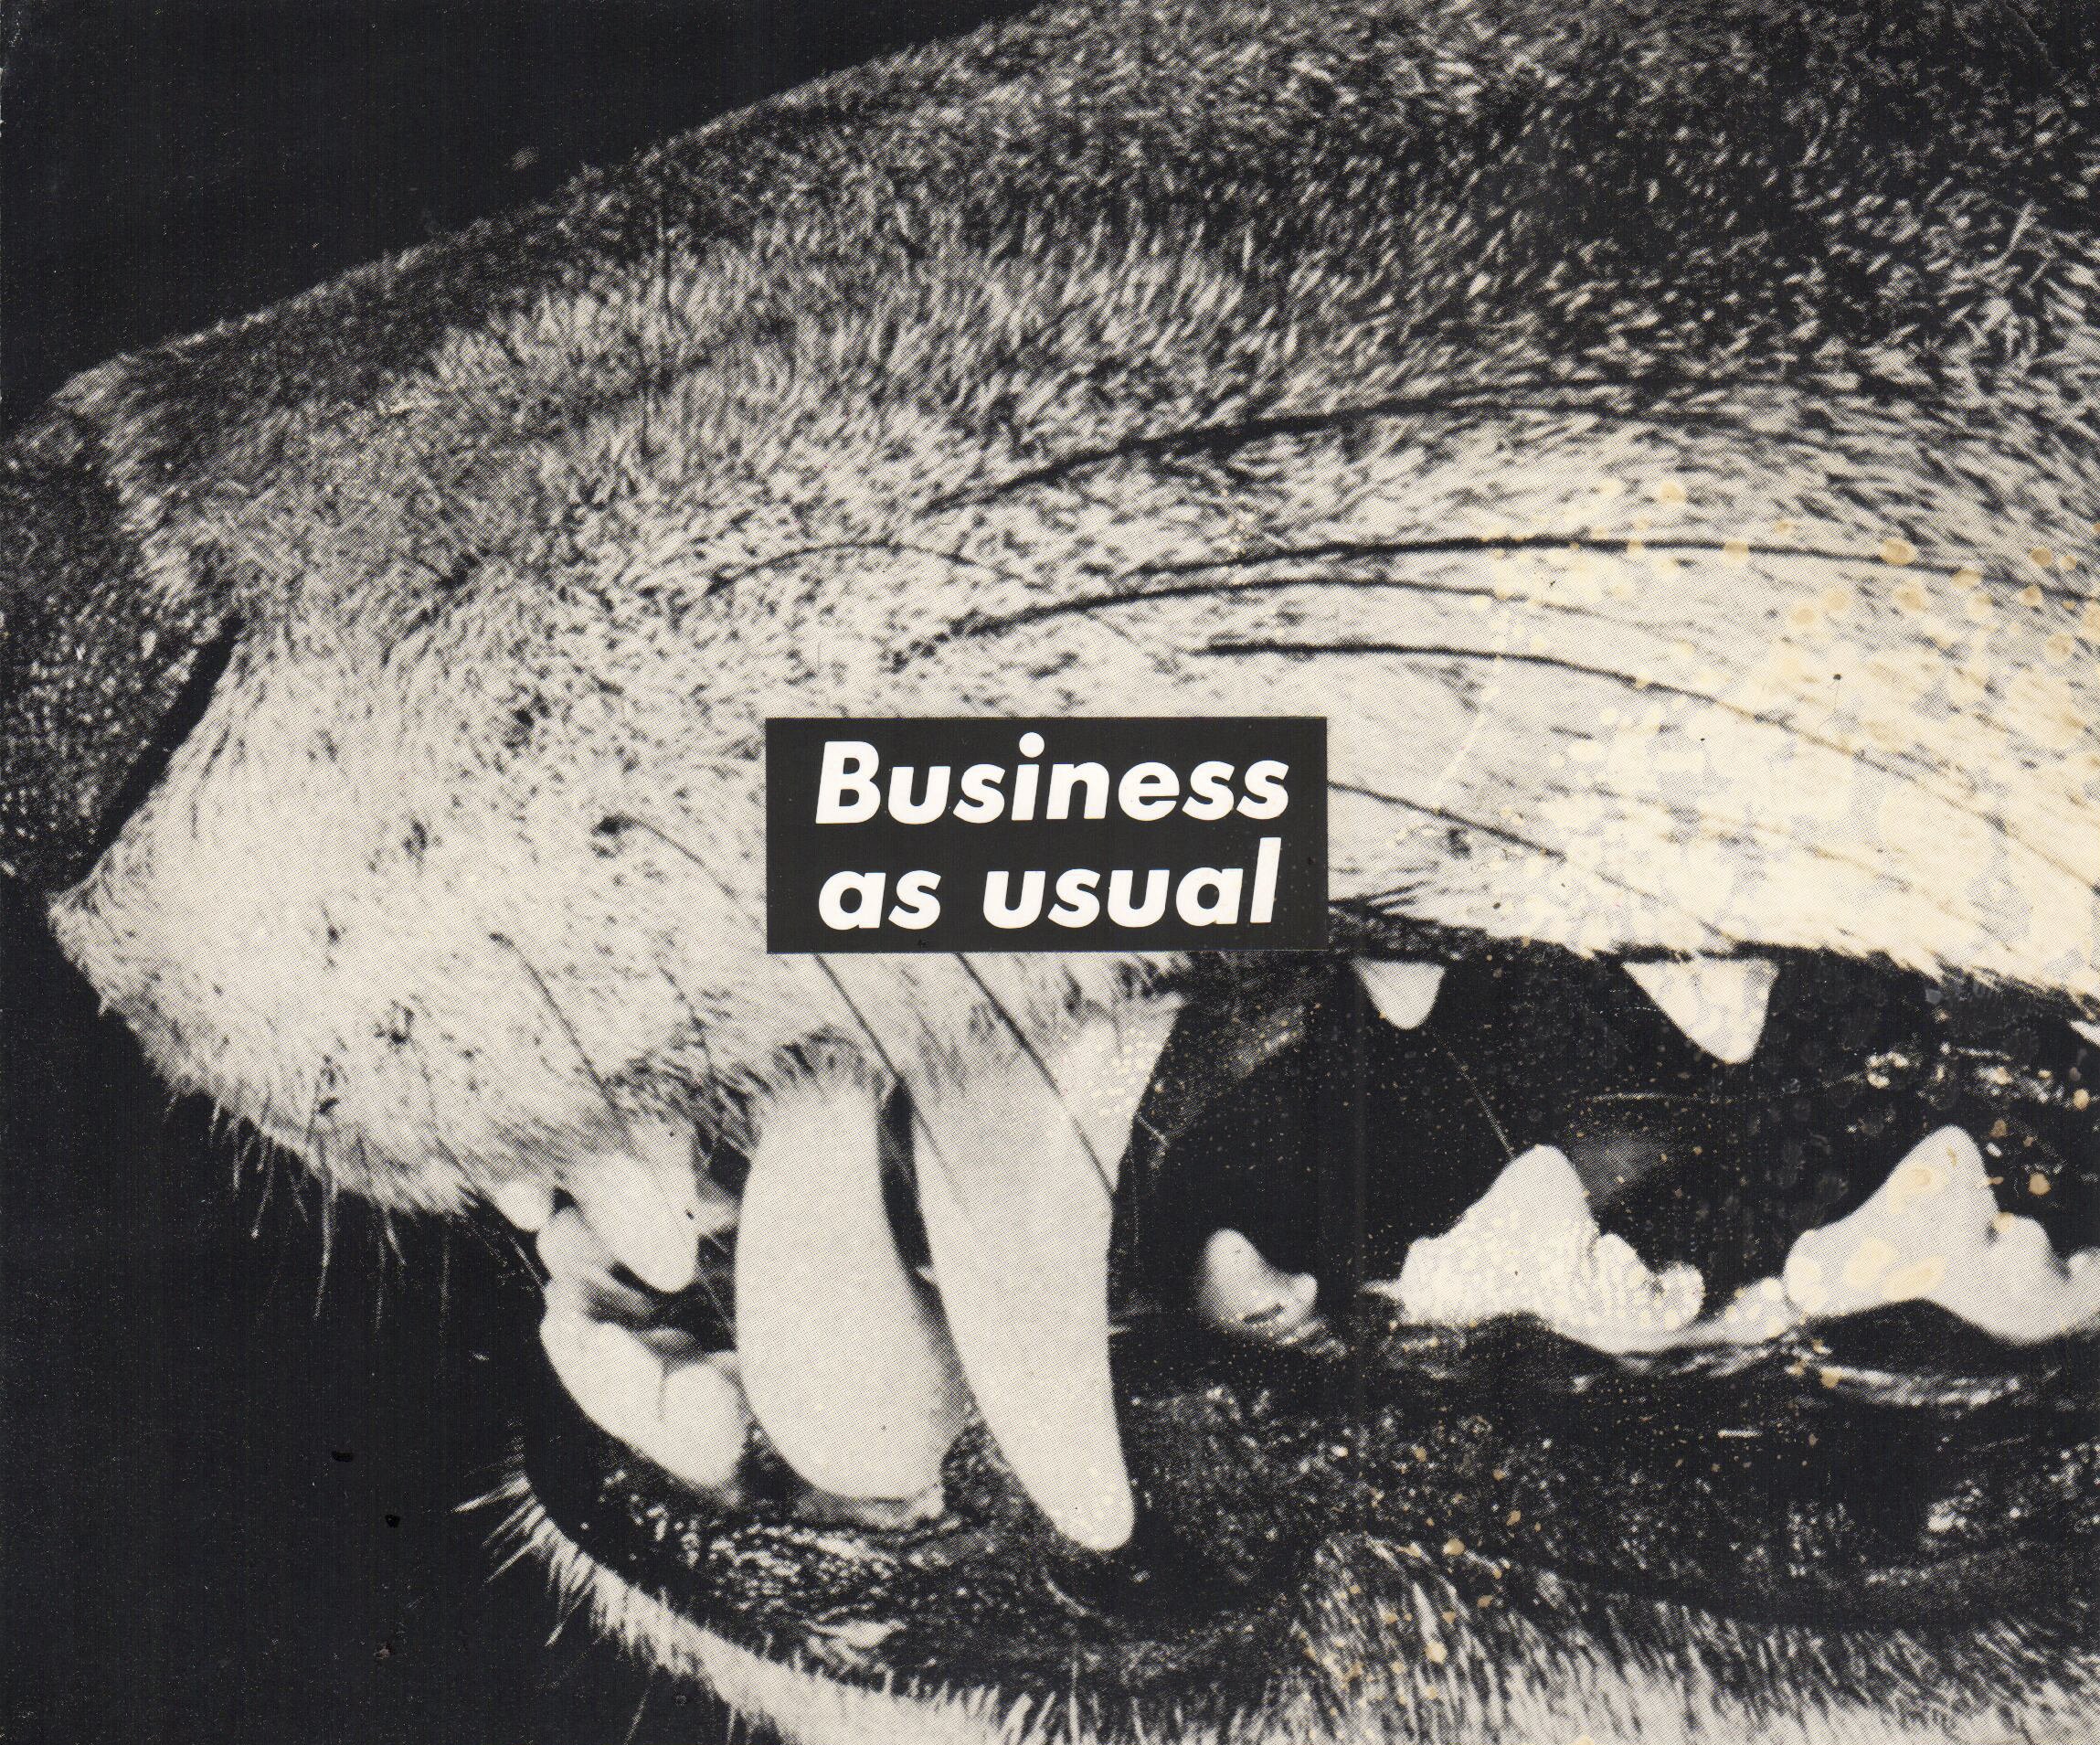  Barbara Kruger   Untitled (Business as usual) , 1987 Photograph and type on paper  16.5 × 19.4 cm / 6 1/2 × 7 5/8 inches   No Copyright  Courtesy the artist and Sprüth Magers 